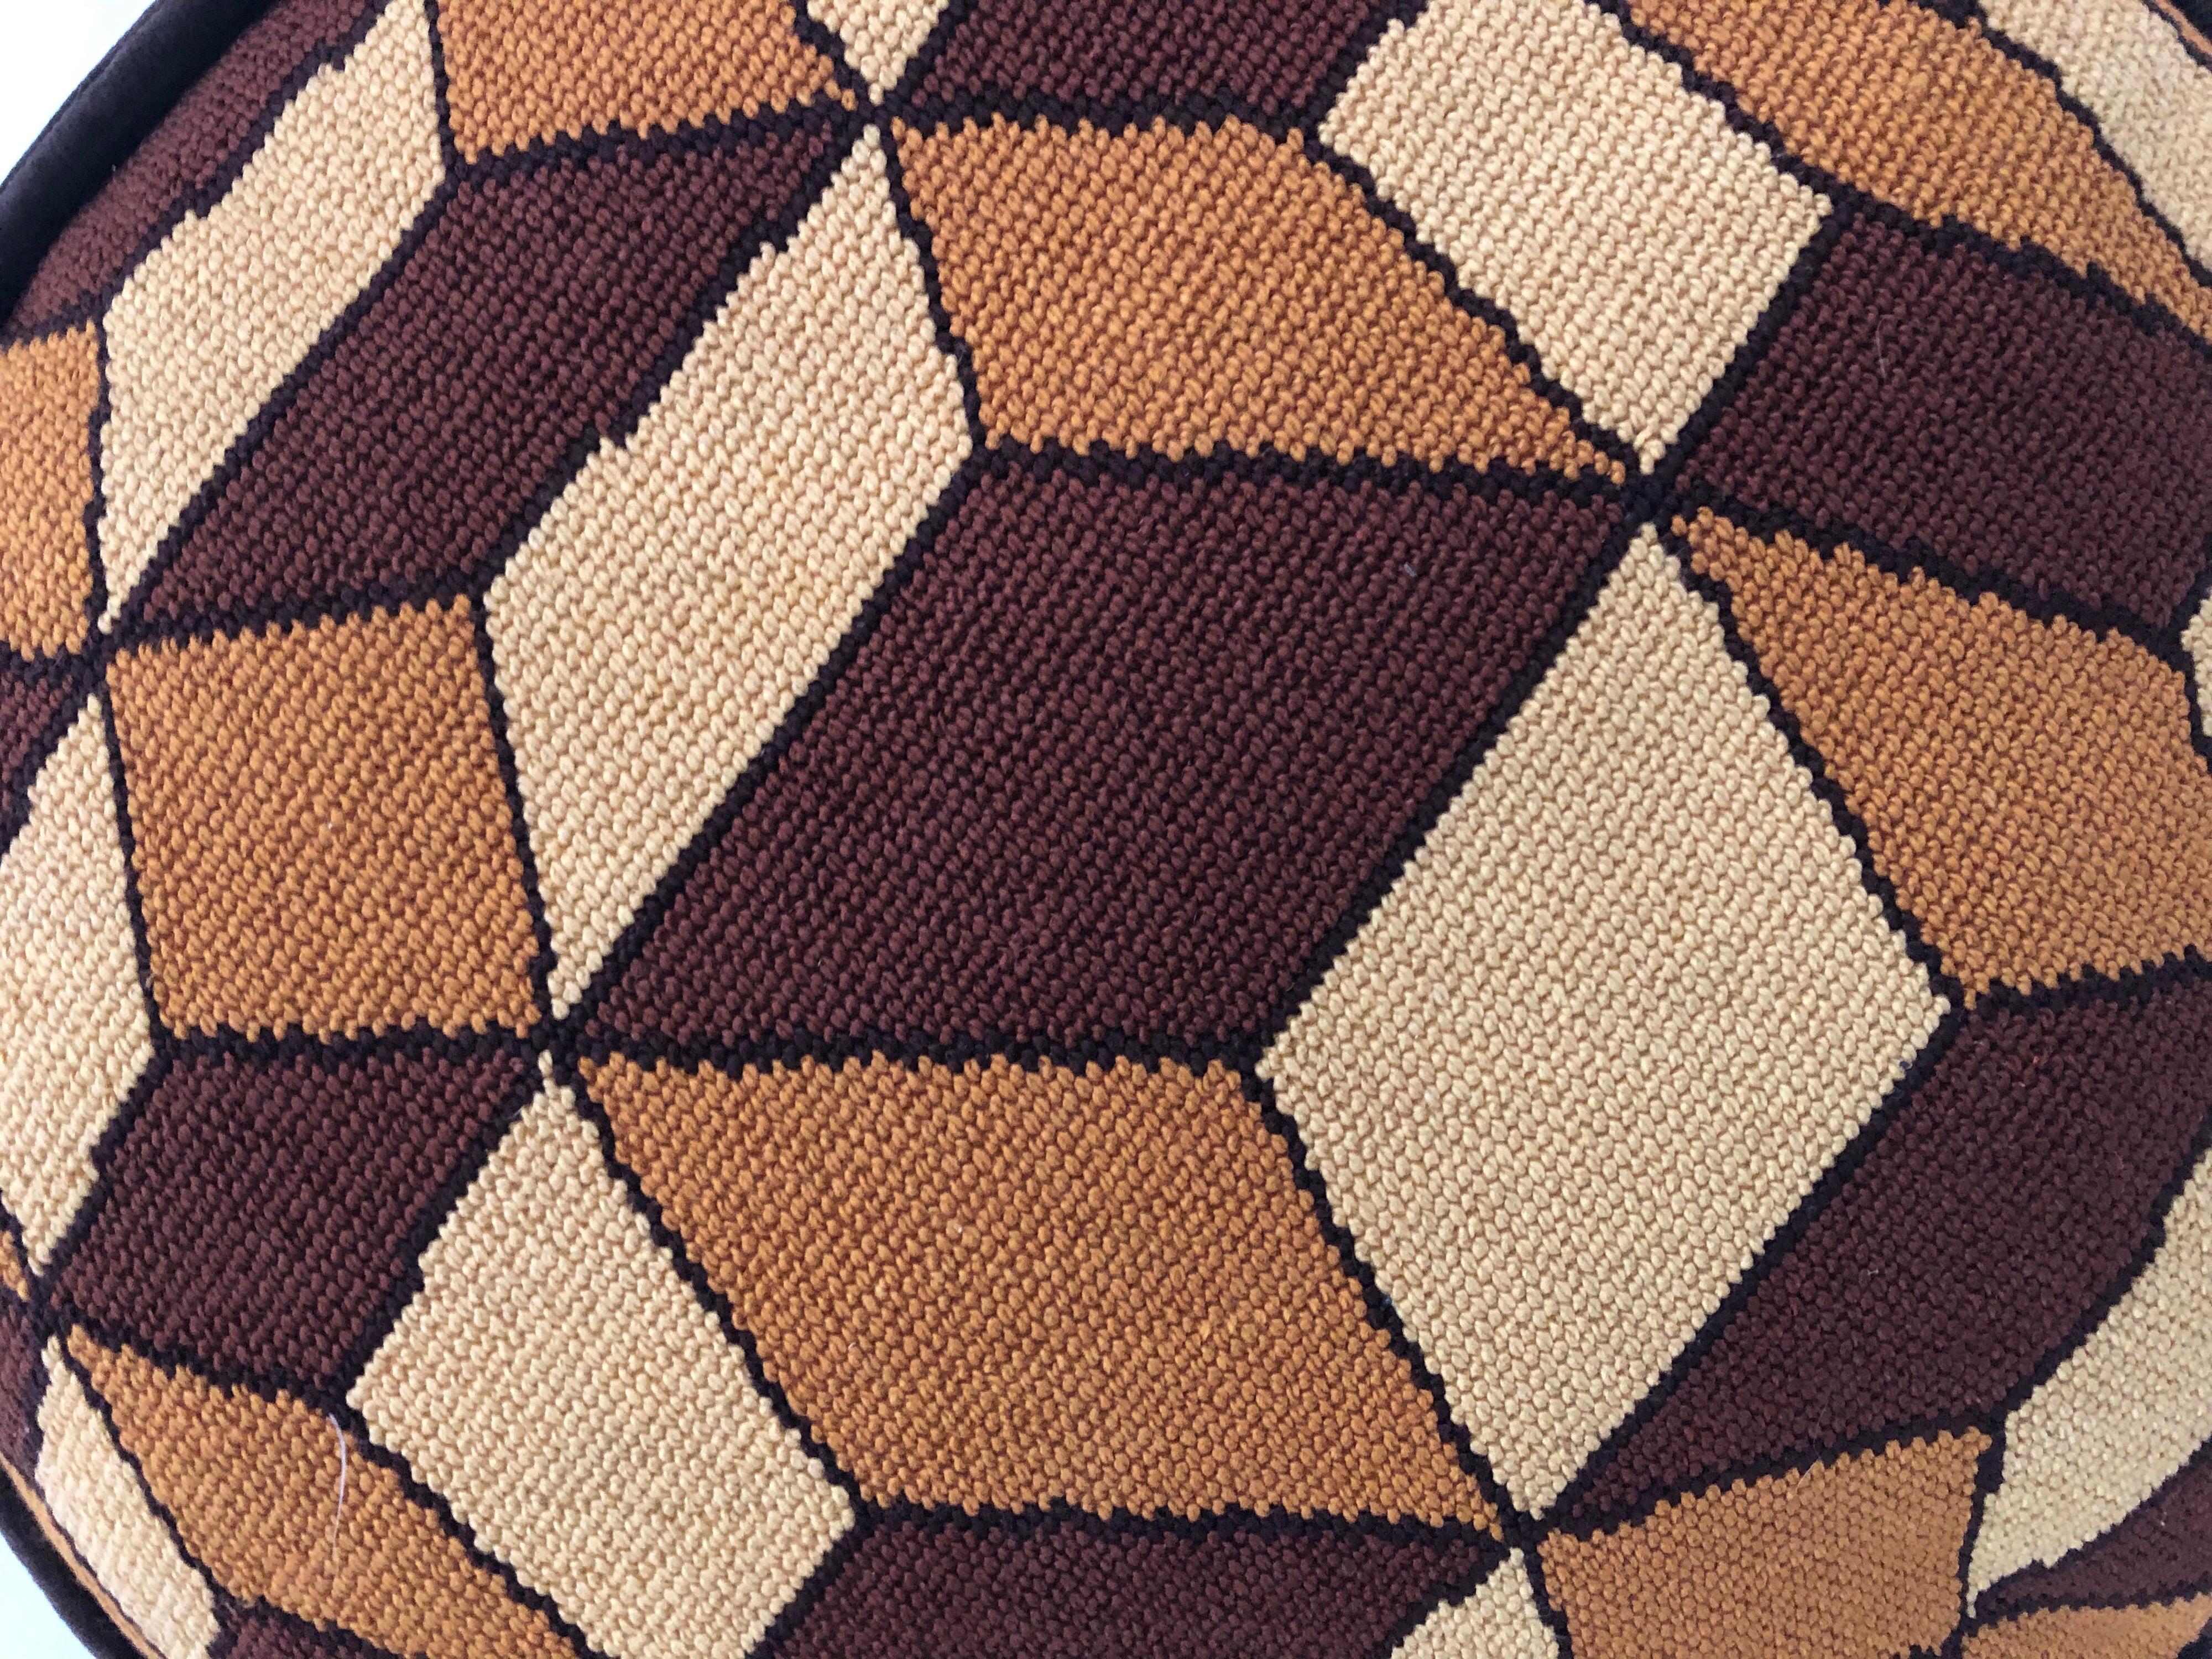 An interesting handmade midcentury geometric oval pillow with brown velvet back. Tones of yellow, mustard, and brown. Two associated pillows also available.